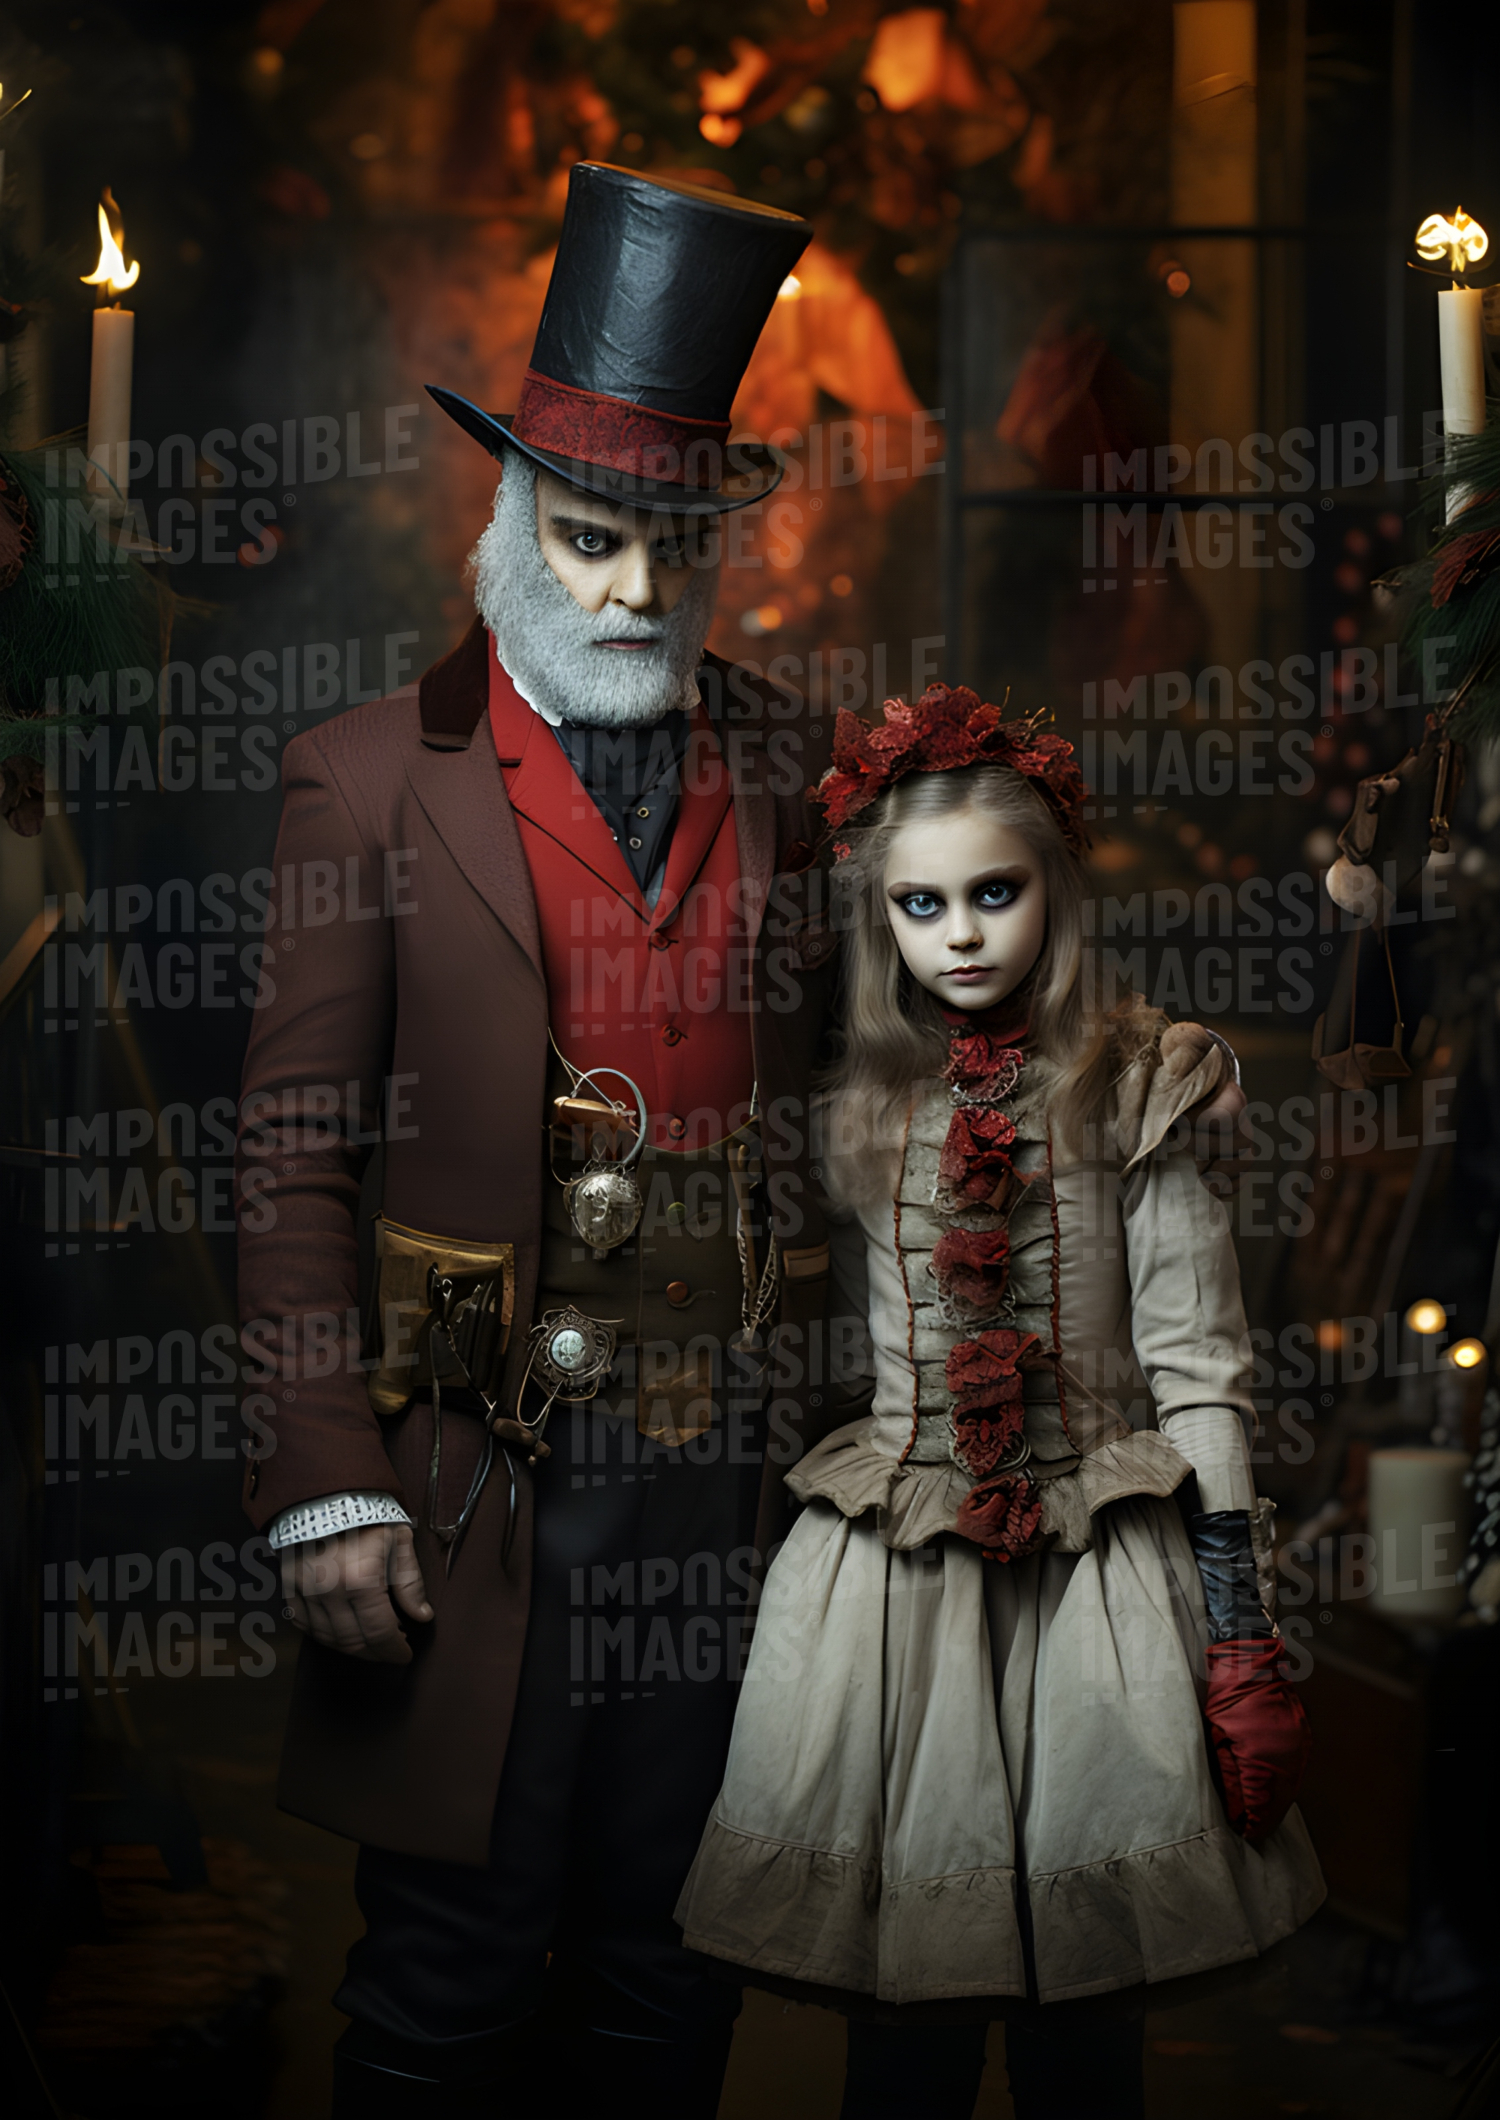 A man and young girl wearing Christmas Halloween costumes -  A man and young girl wearing festive costumes for the unusual combination of Christmas and Halloween.